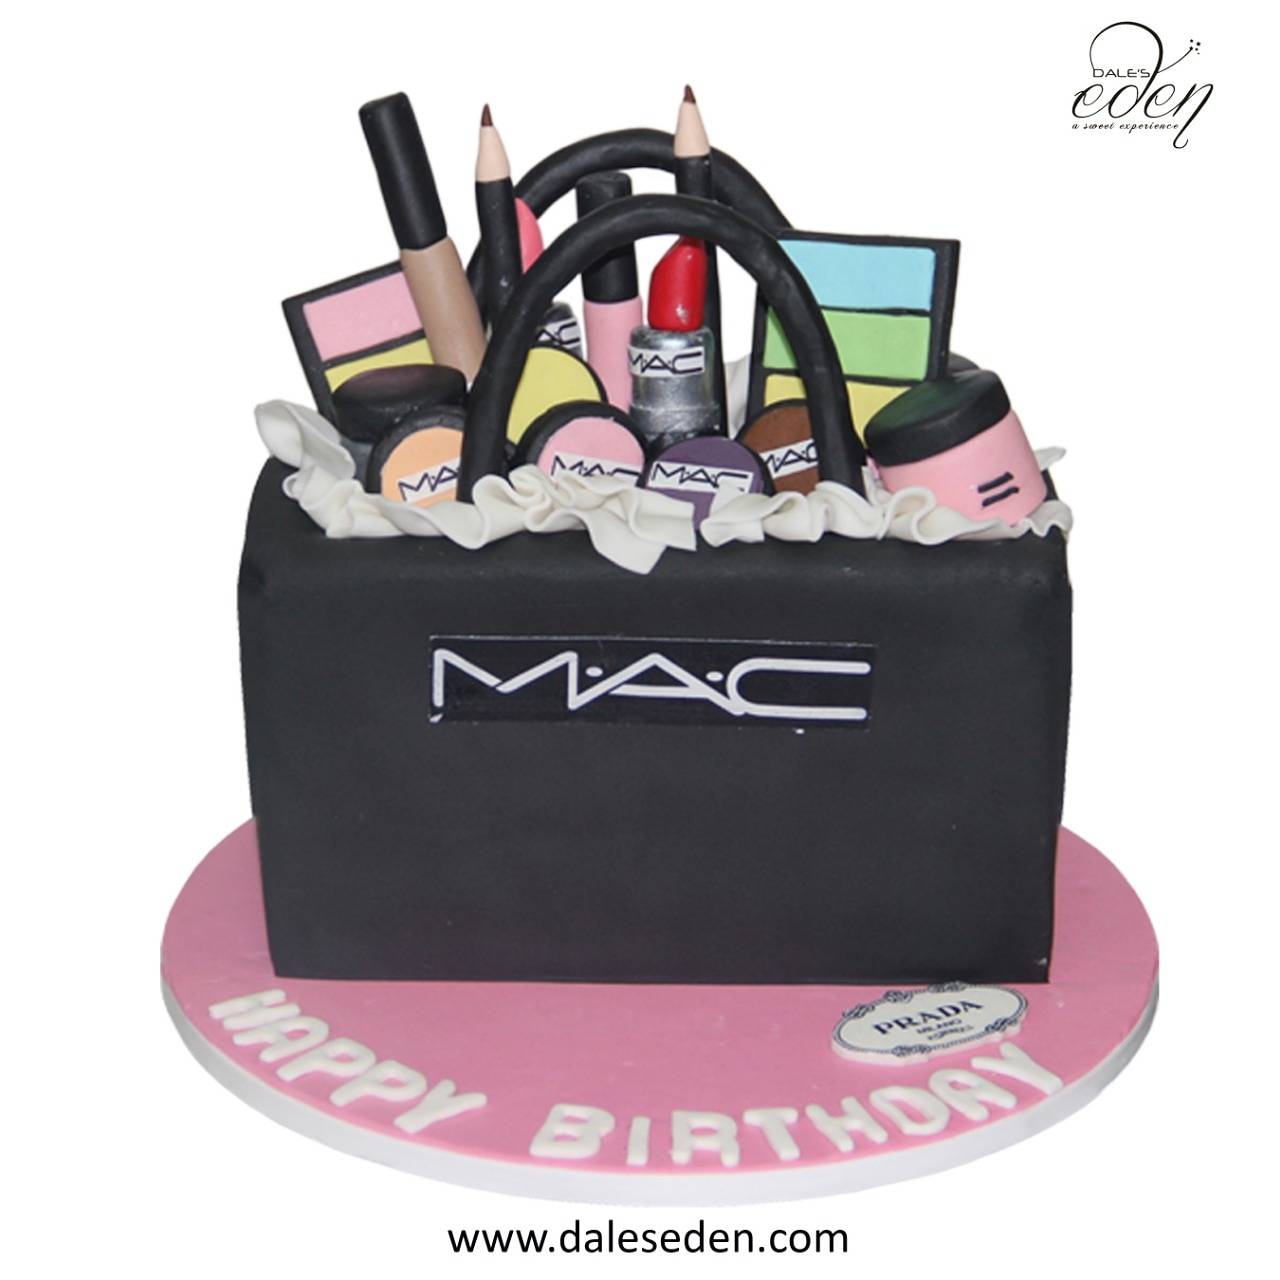 Tyranny genert klassisk daleseden on Twitter: "What can be better than this gorgeous Makeup Kit Cake  to celebrate birthday of a diva. Make every moment as special as she is  with #DalesEdenCakeShop. Let's together spread